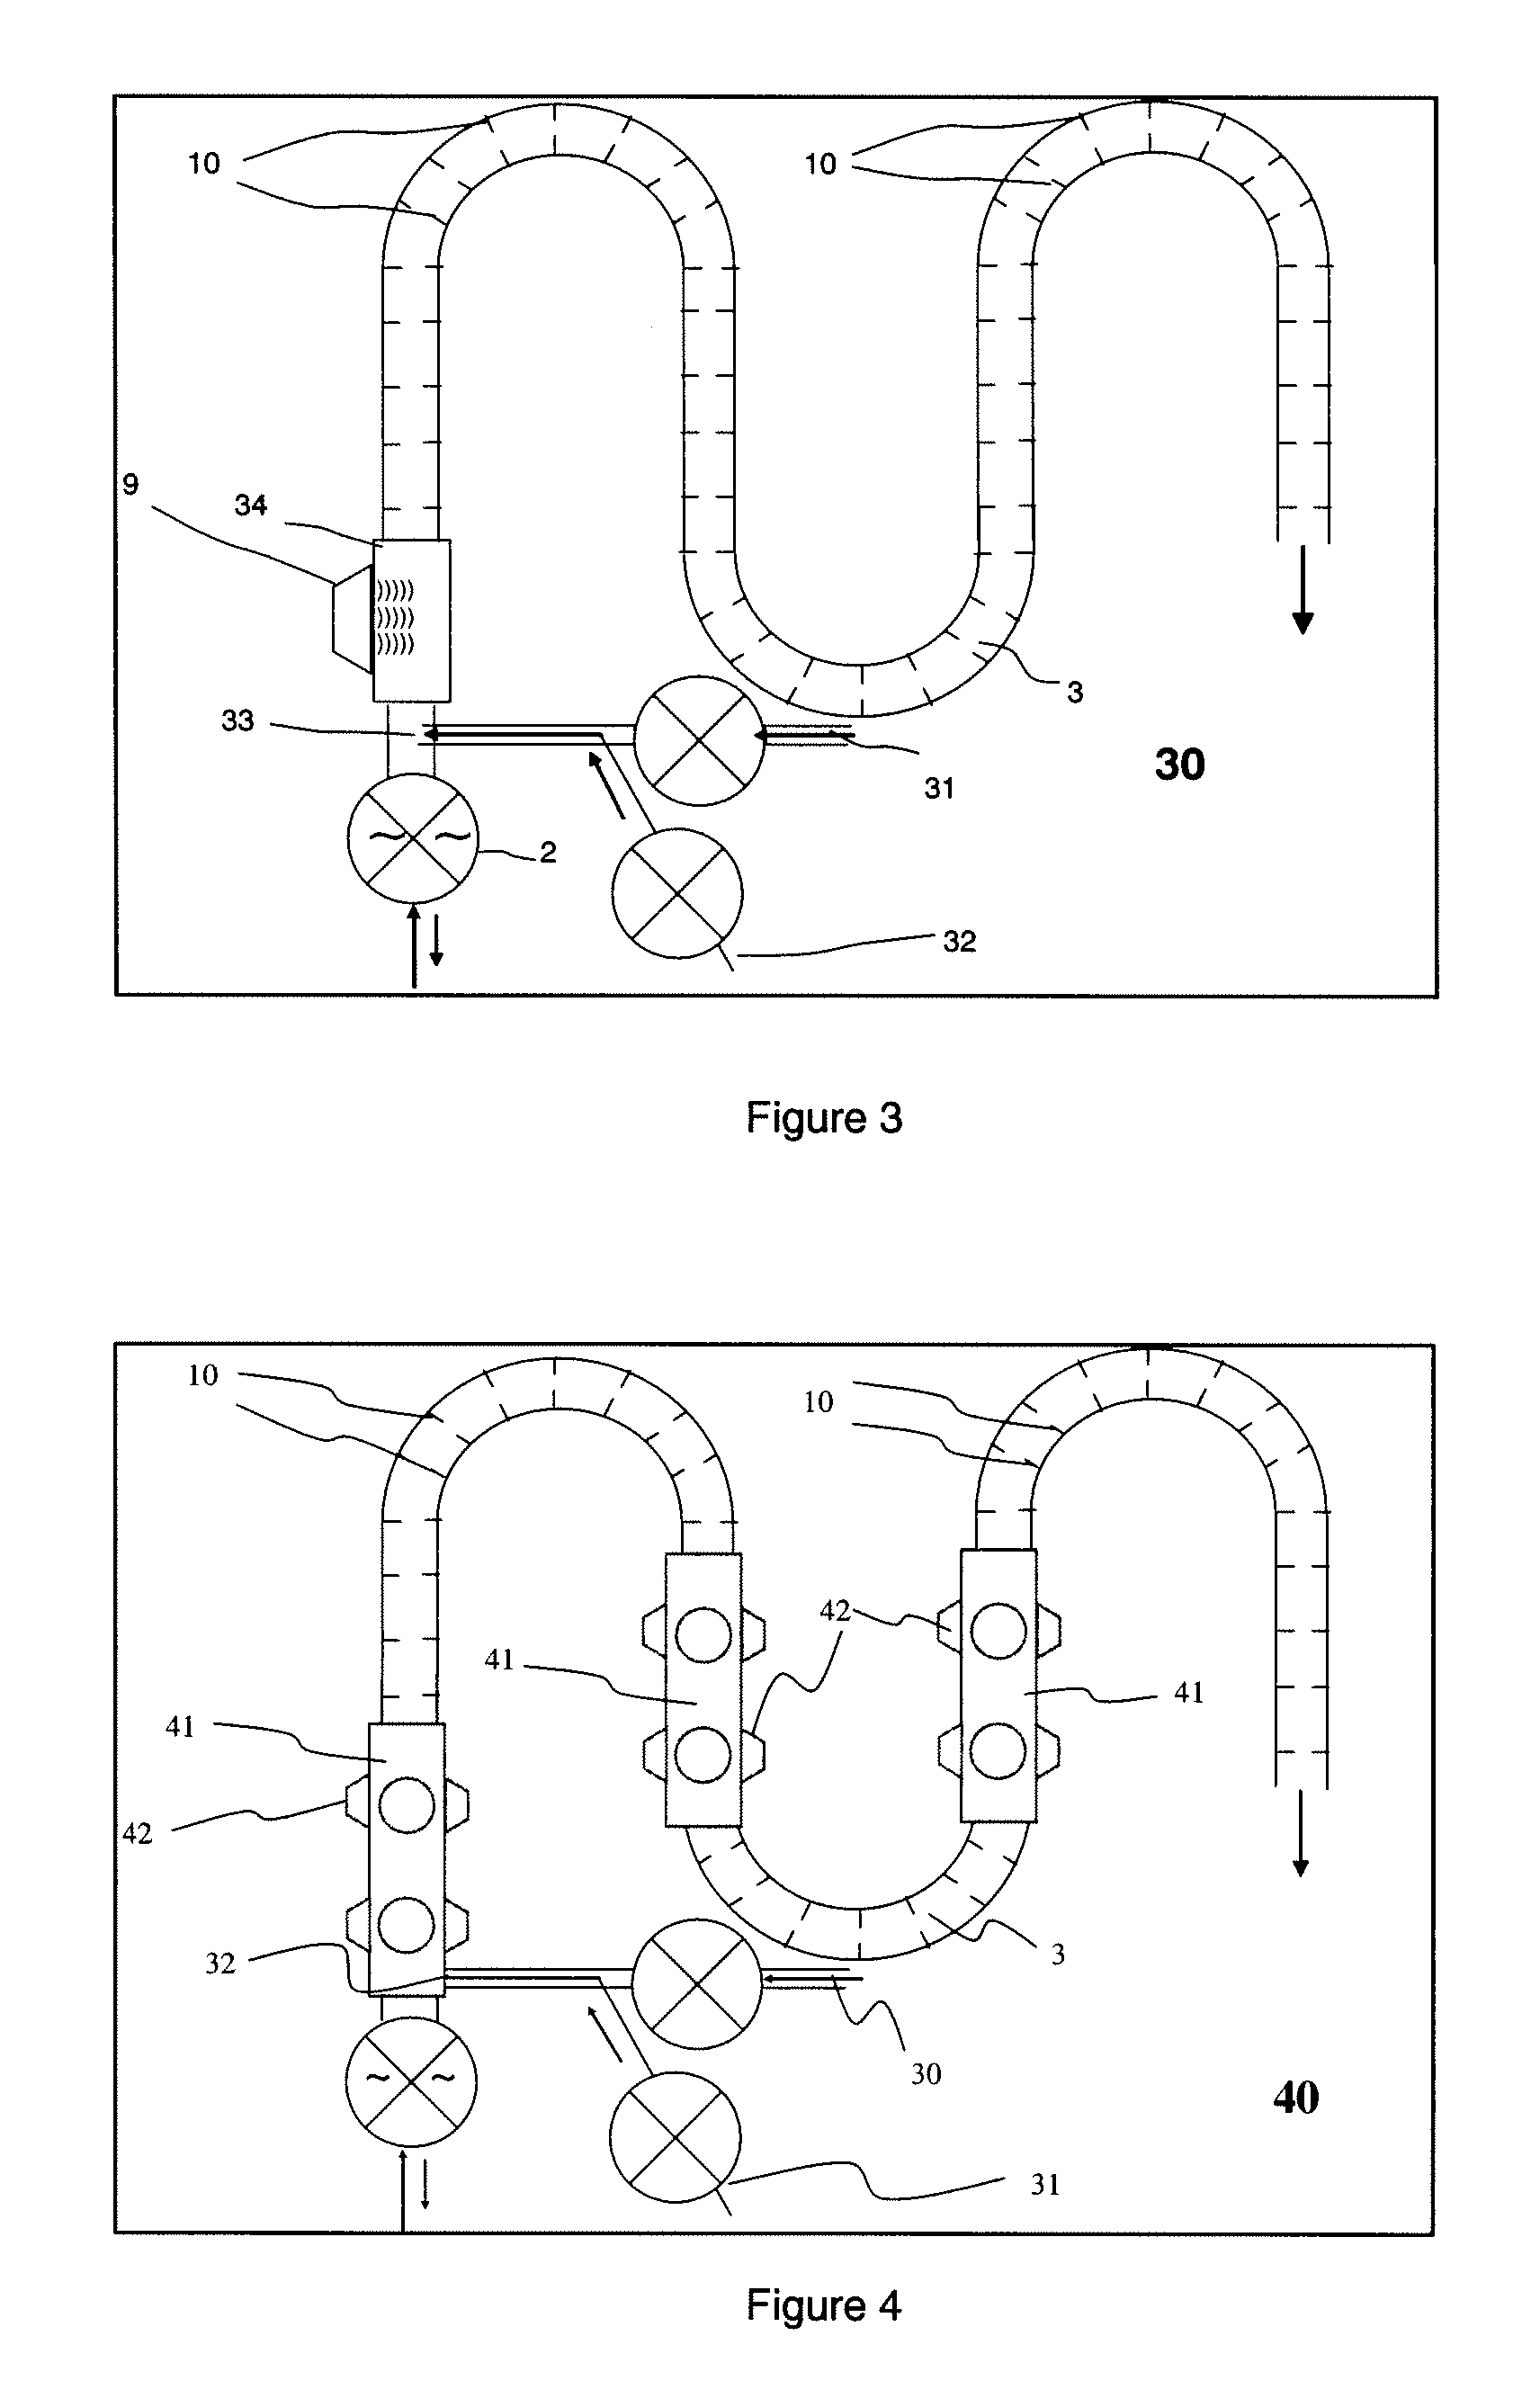  apparatus and process for producing crystals